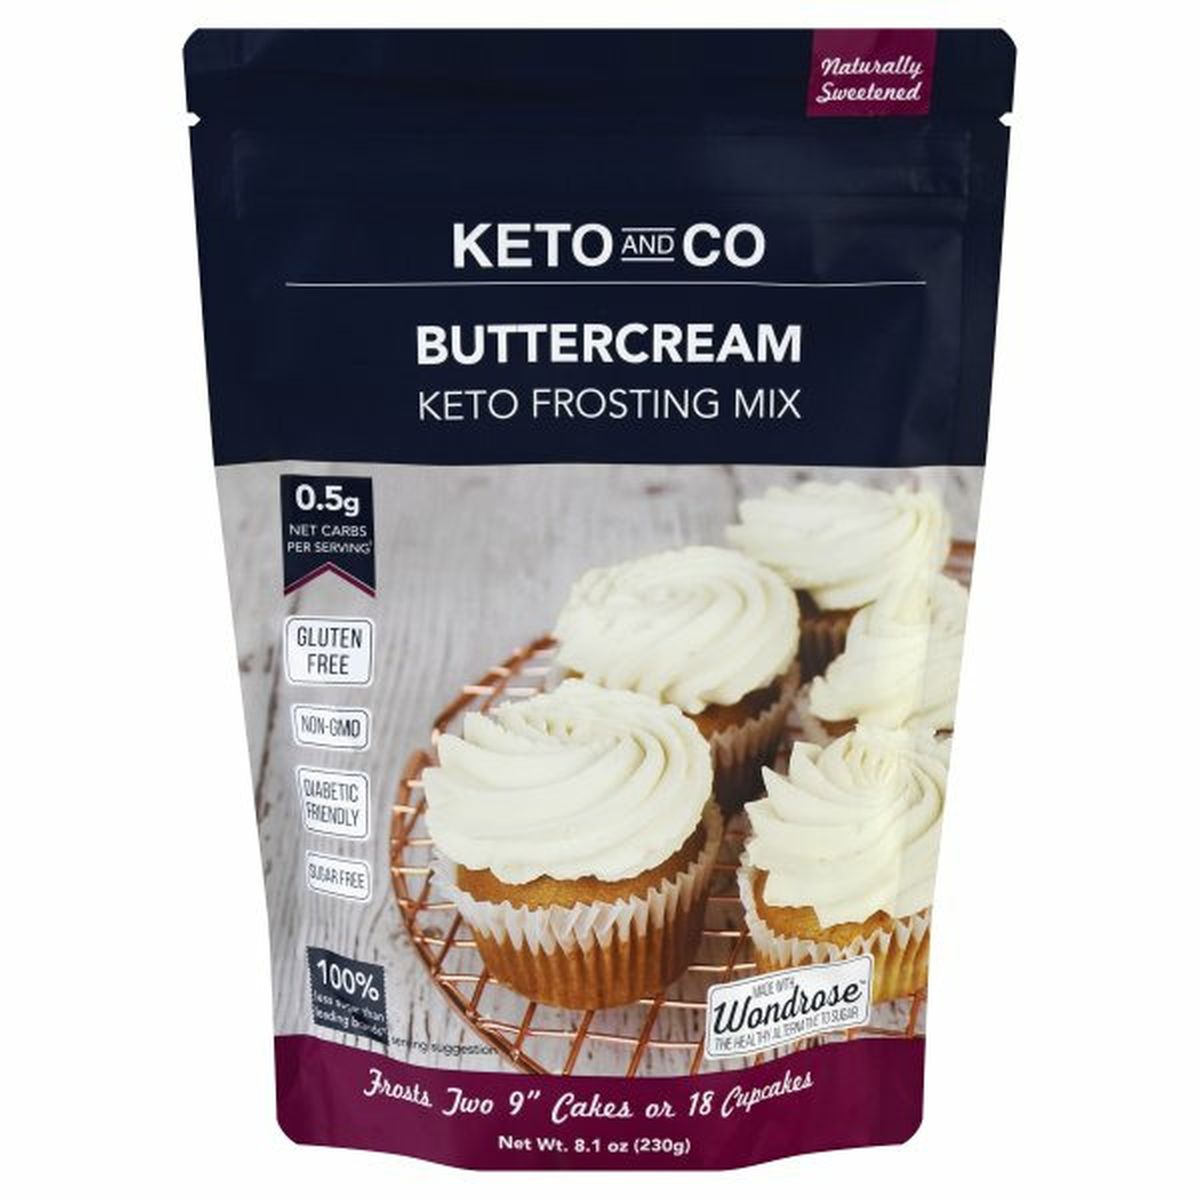 Calories in Keto And Co Keto Frosting Mix, Buttercream